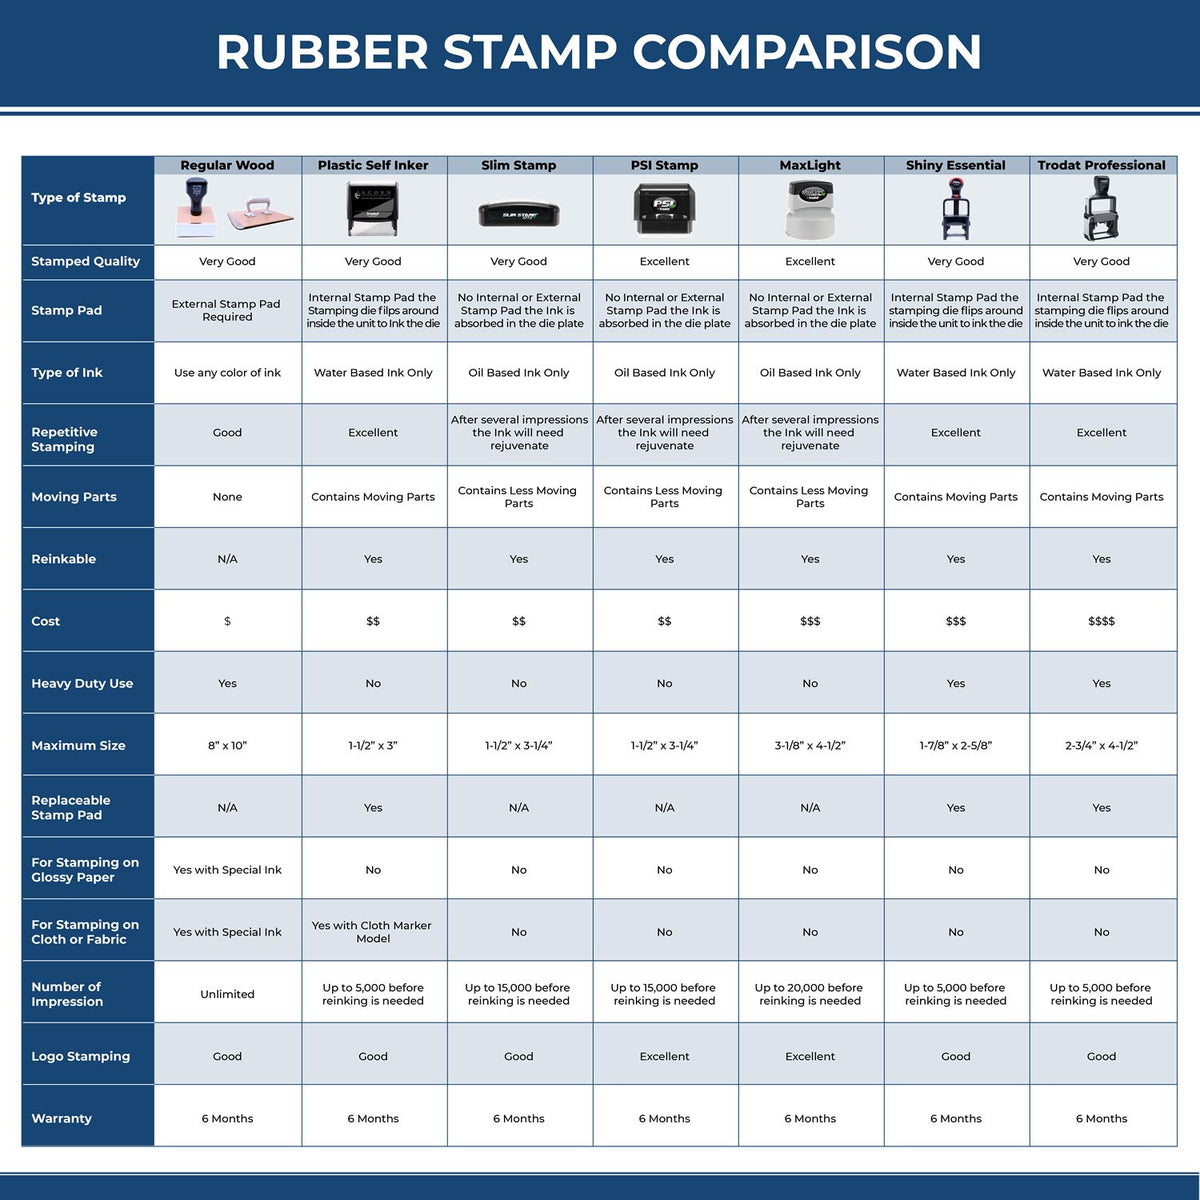 A comparison chart for the different types of mount models available for the New York Professional Engineer Seal Stamp.